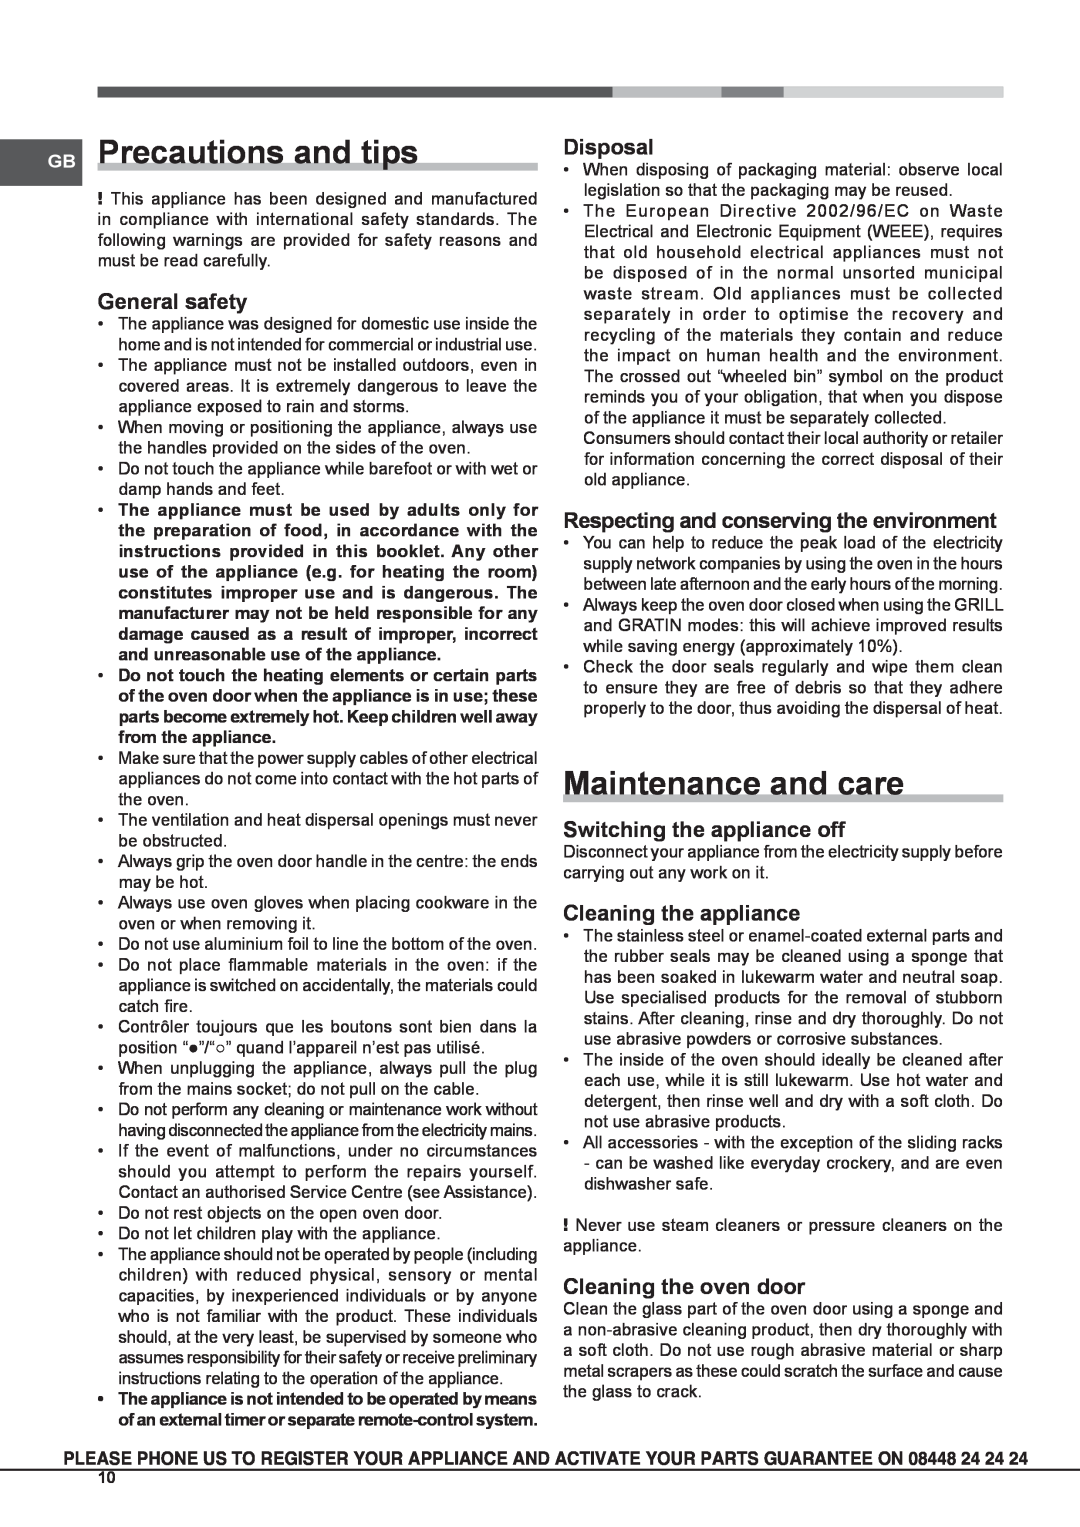 Hotpoint SCL 08 EB GB Precautions and tips, Maintenance and care, General safety, Disposal, Switching the appliance off 